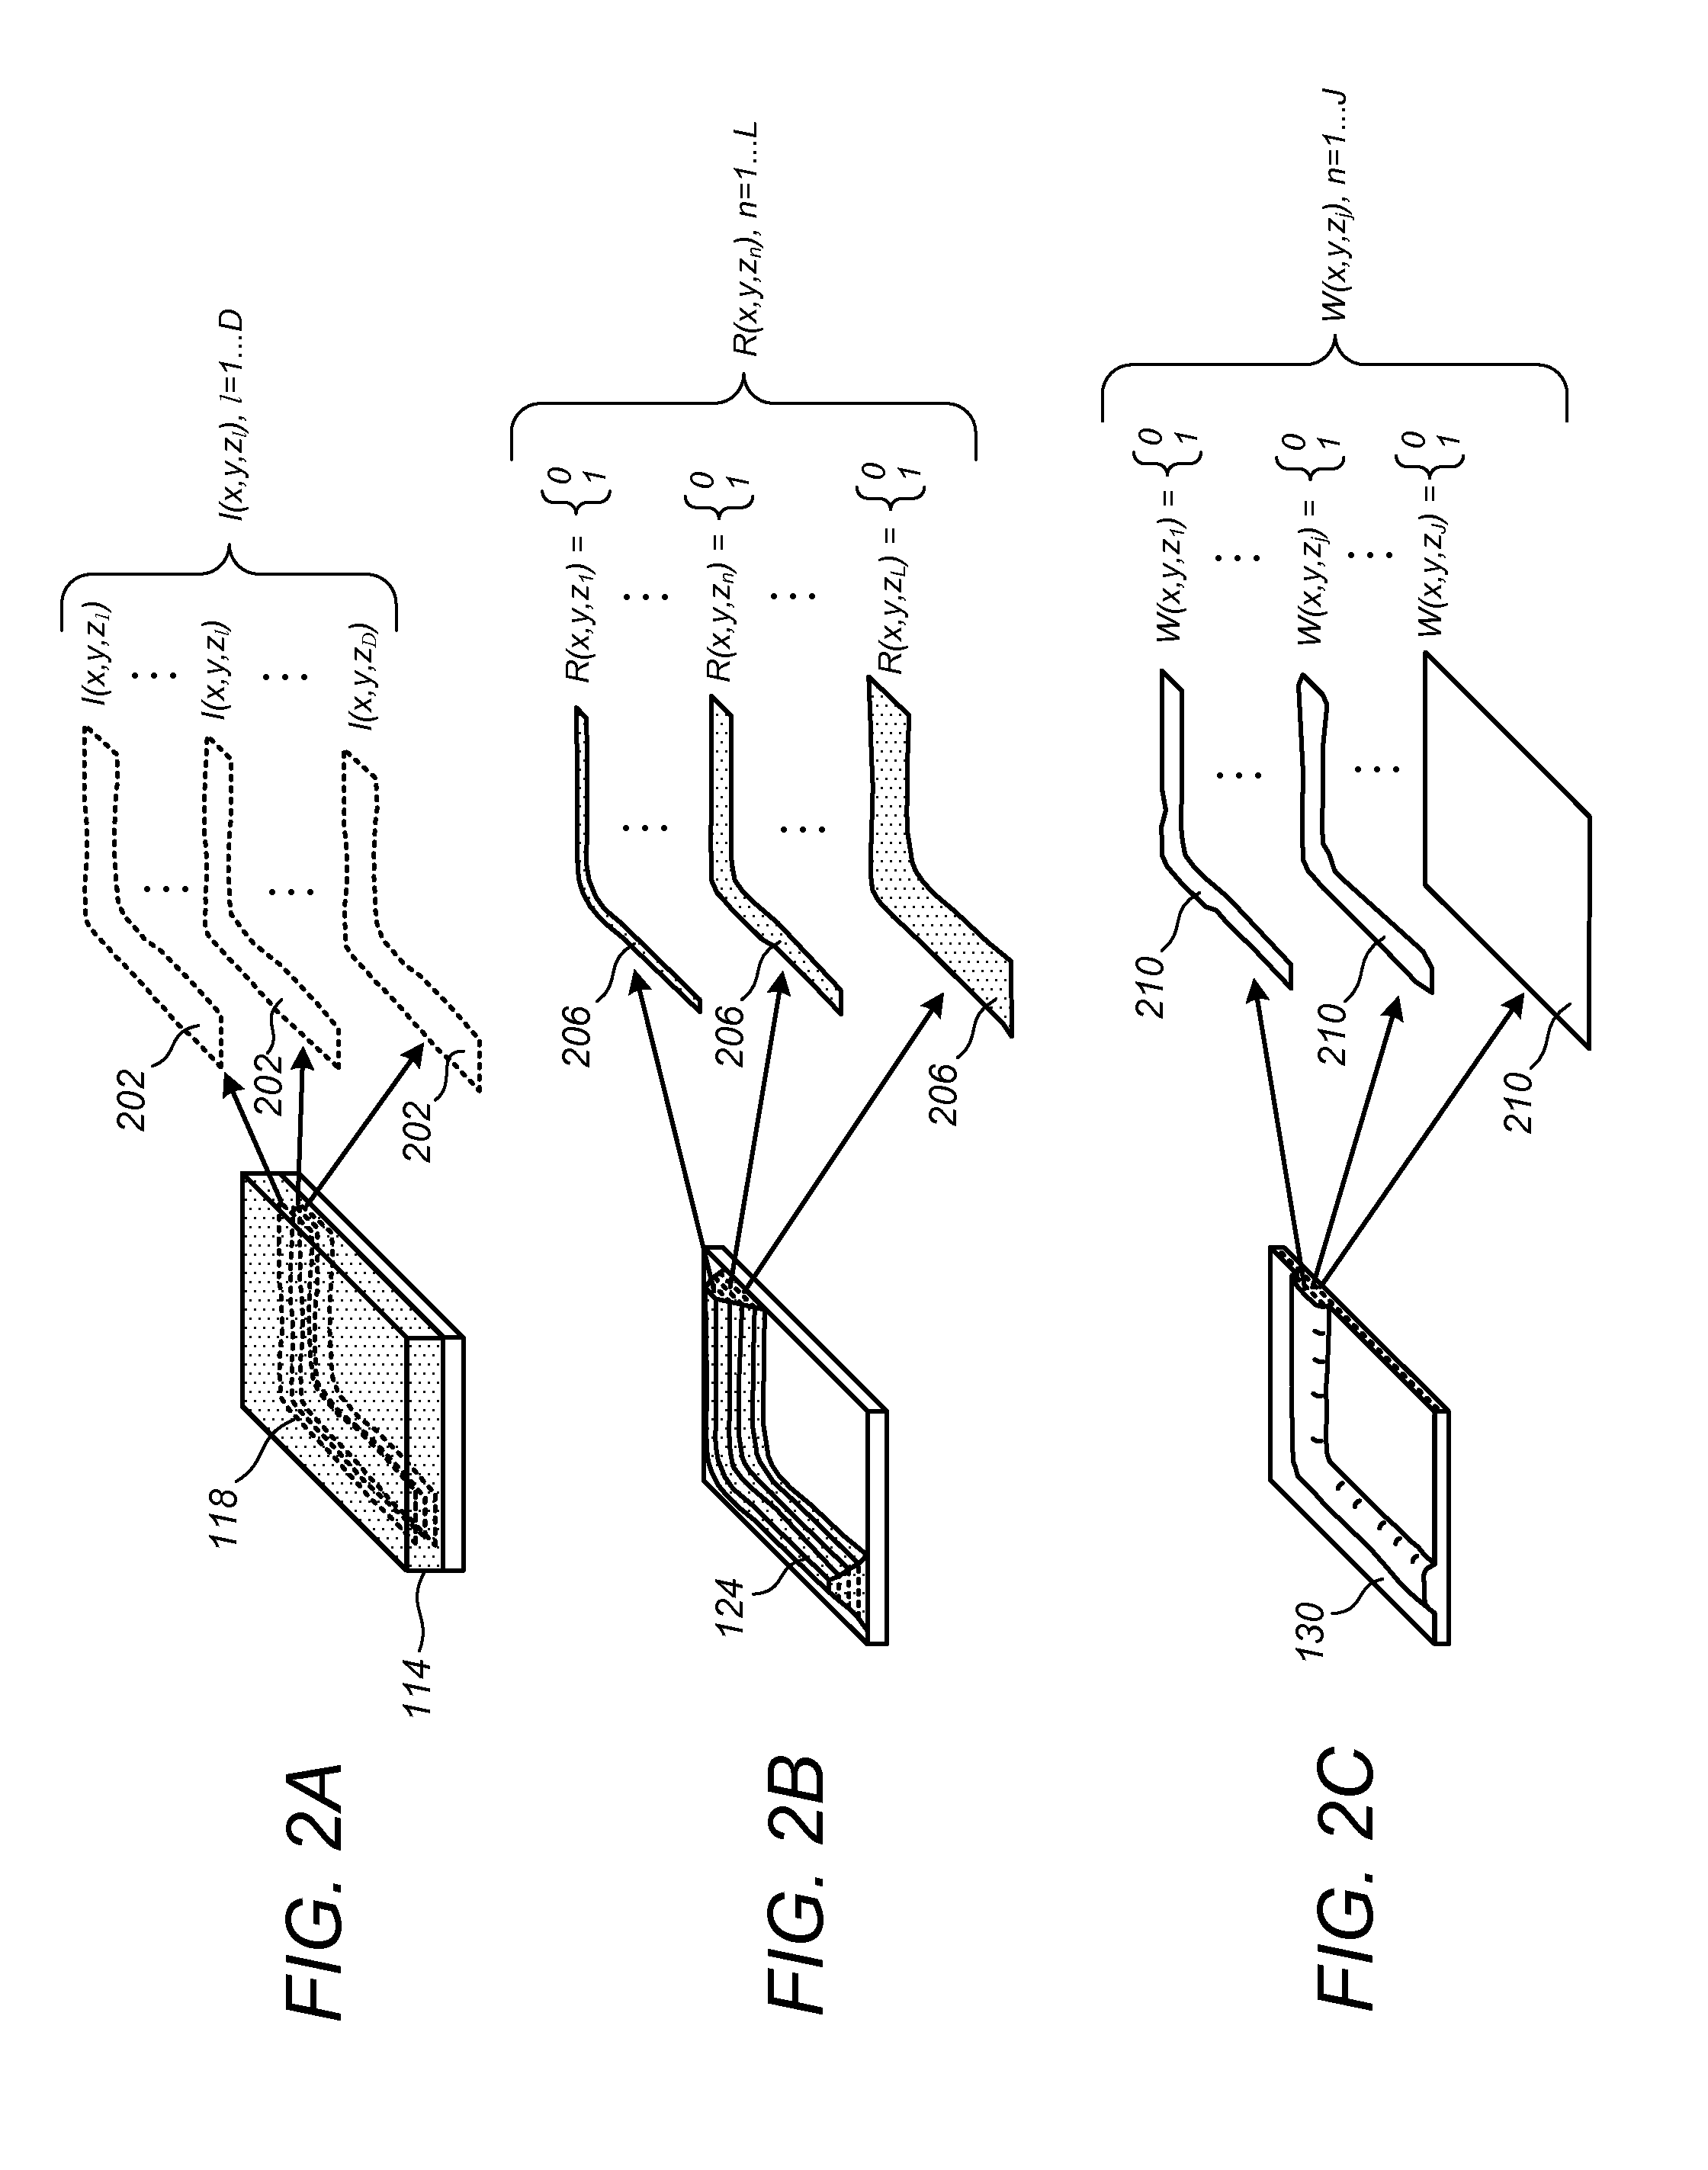 Computer simulation of photolithographic processing